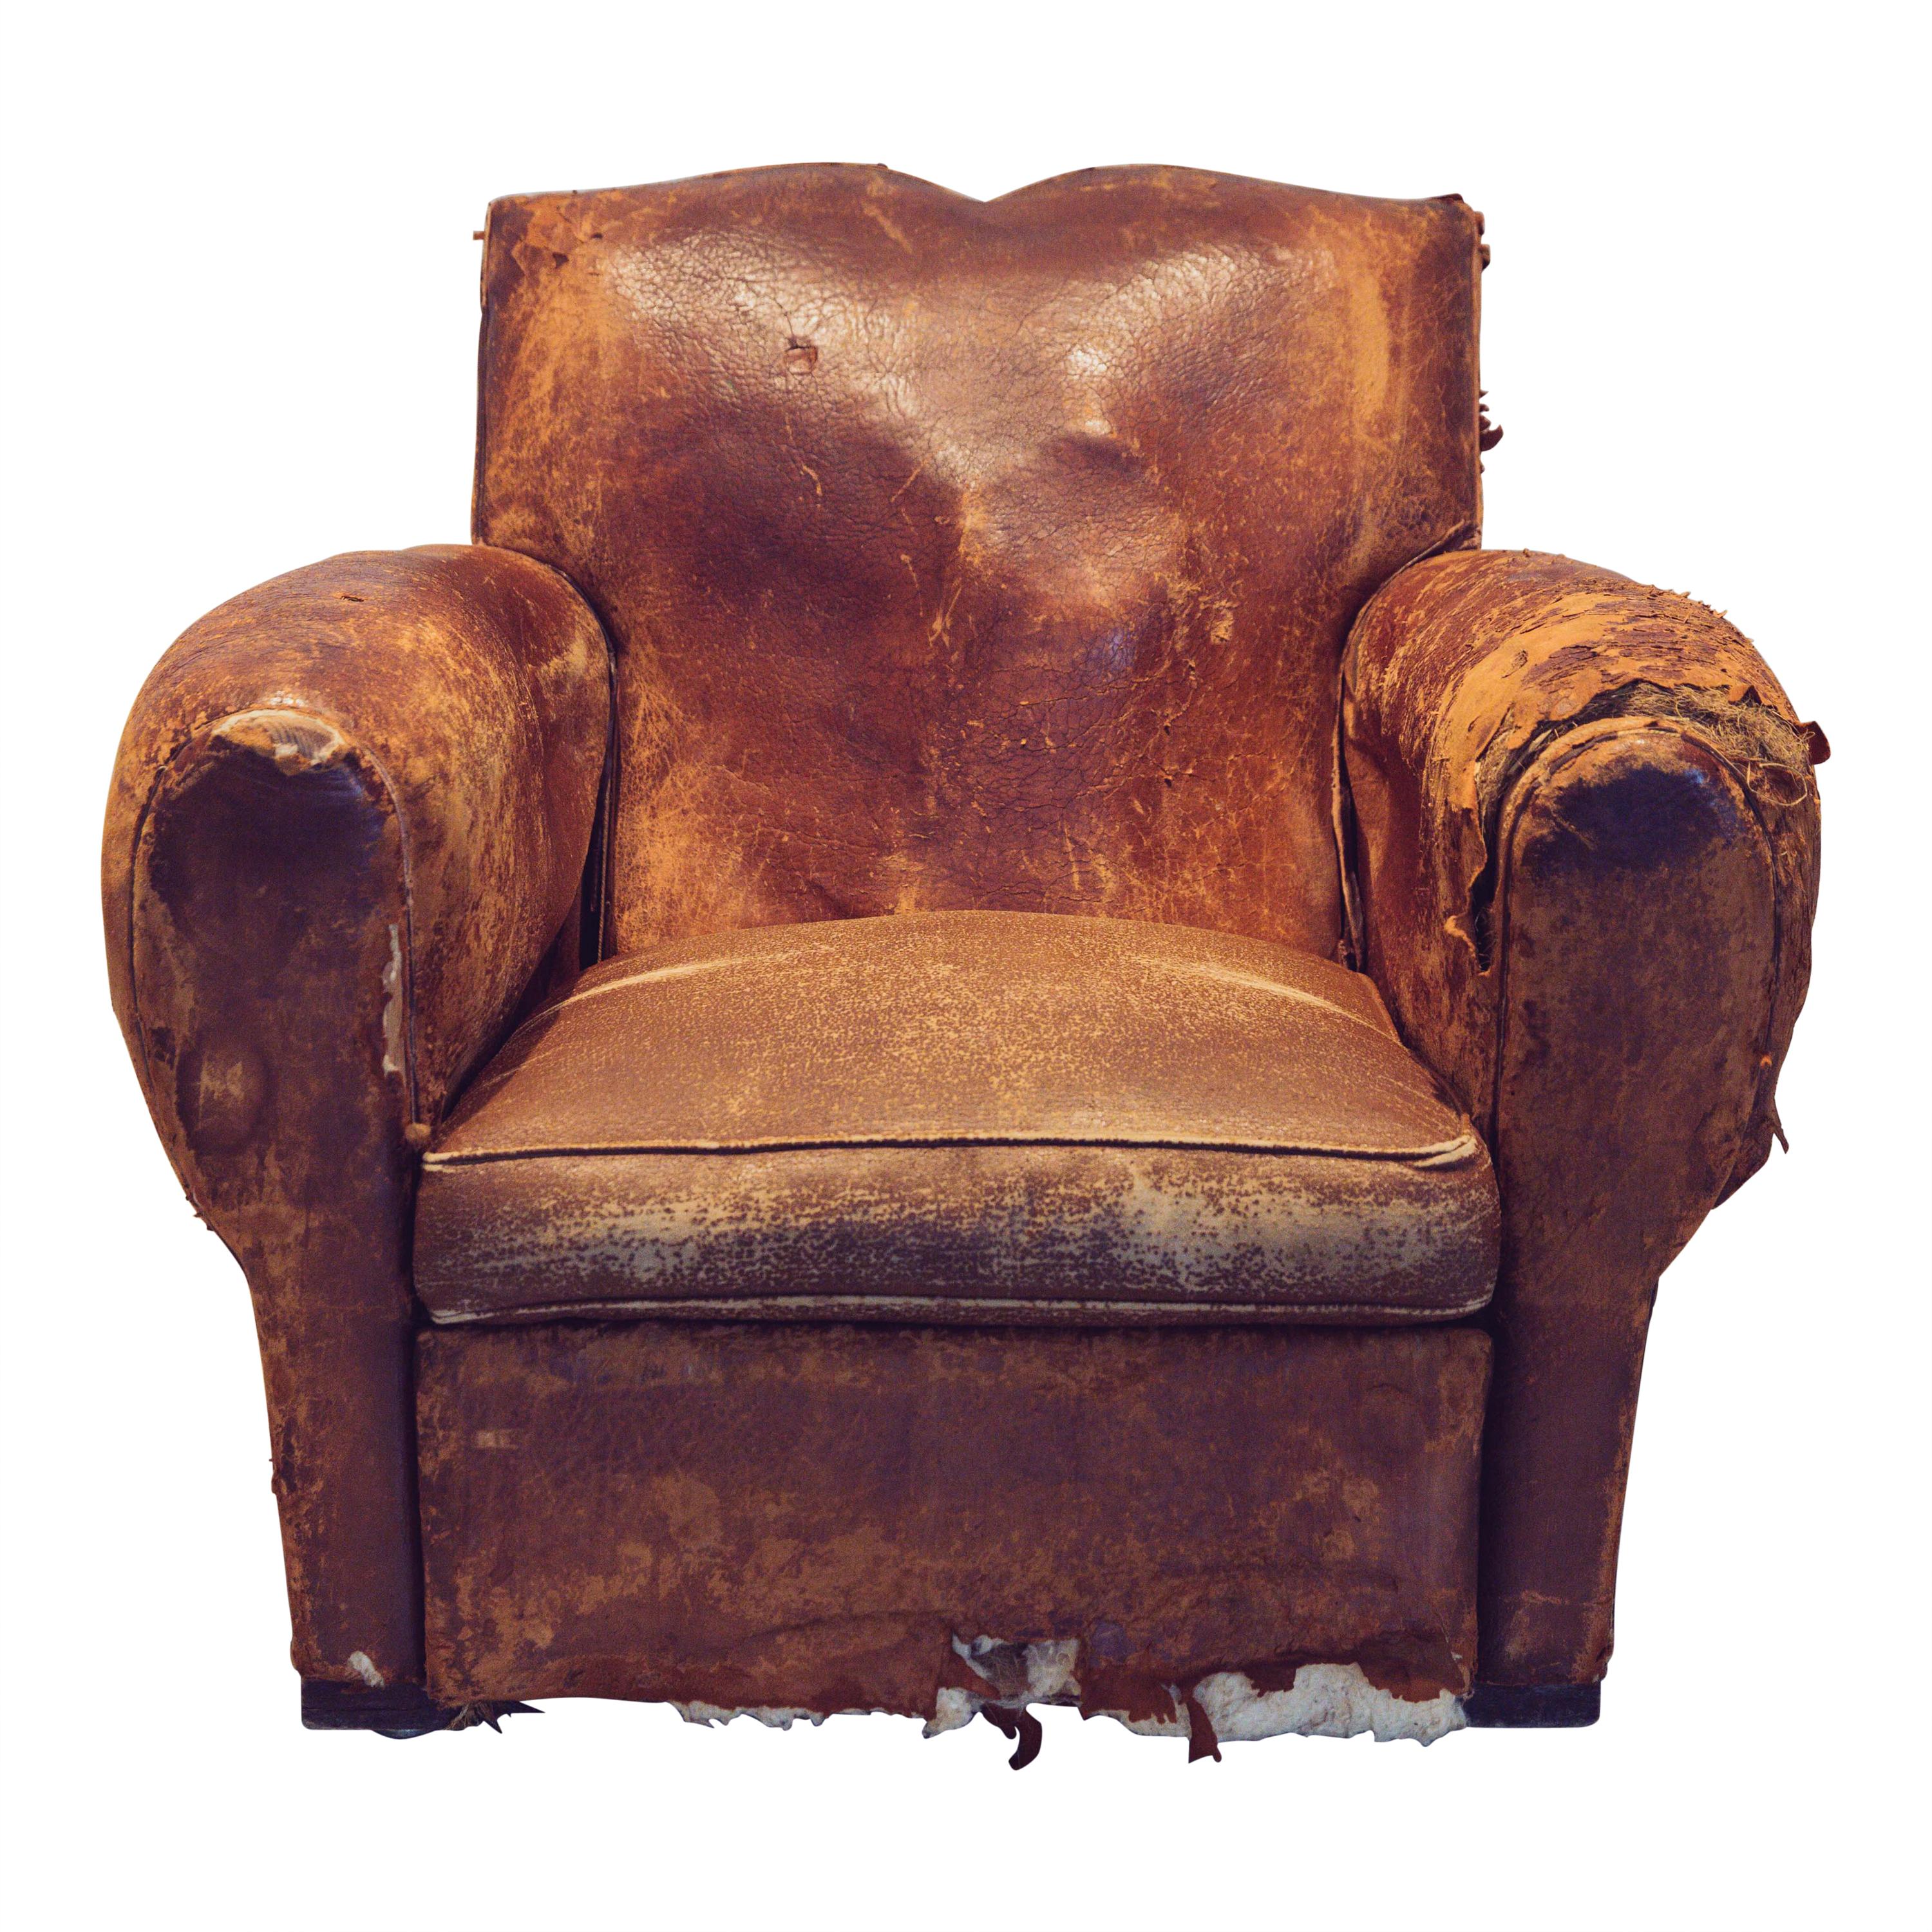 Distressed French Art Deco Leather Art Deco Club Chair For Sale